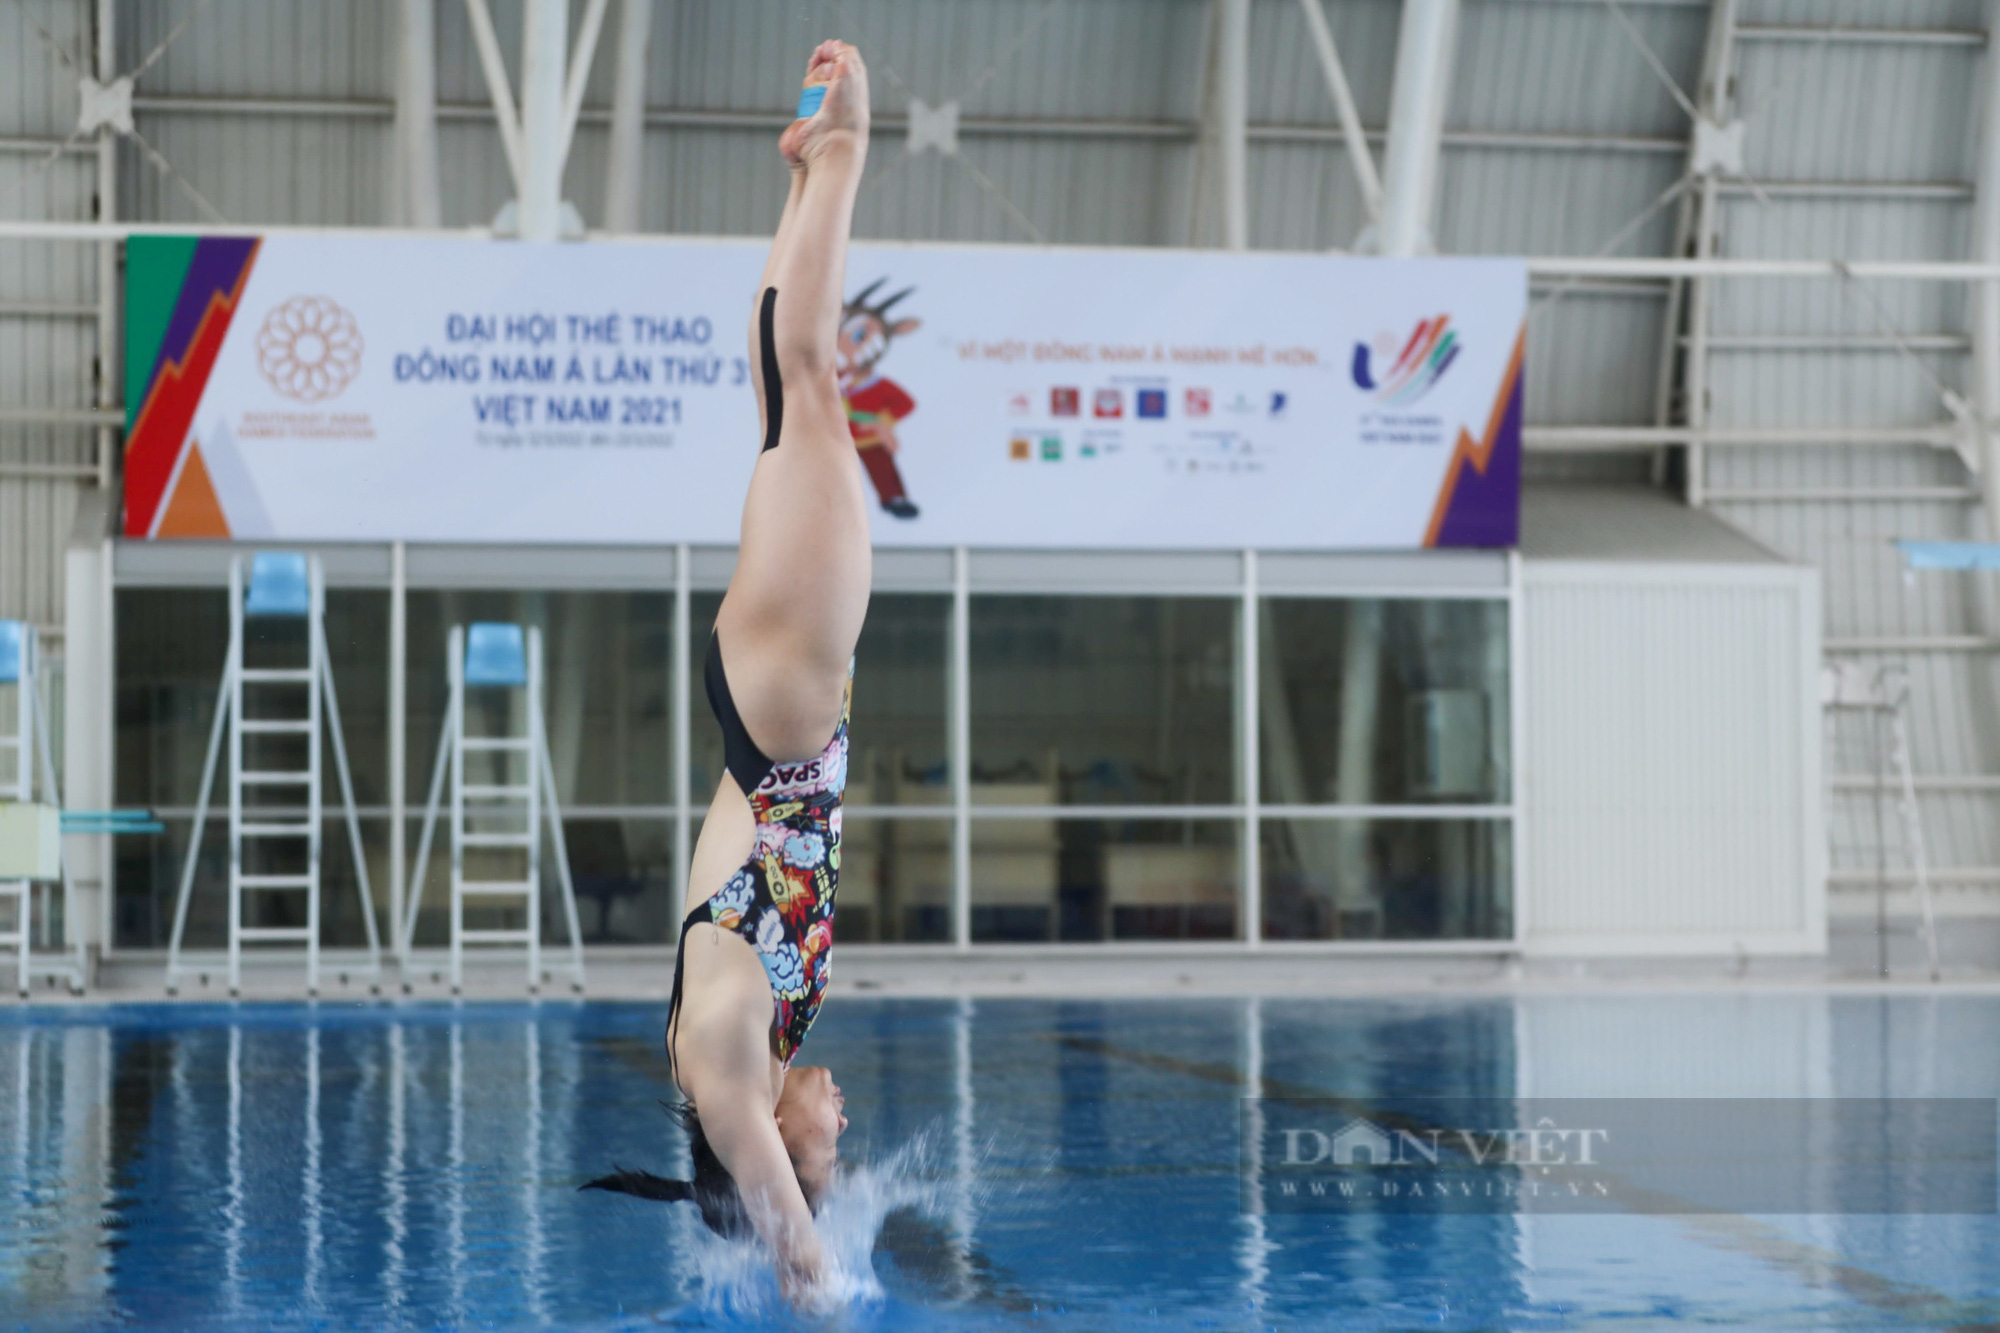 Watch with your own eyes the Vietnamese diving team practice to prepare for the 31st SEA Games - Photo 8.